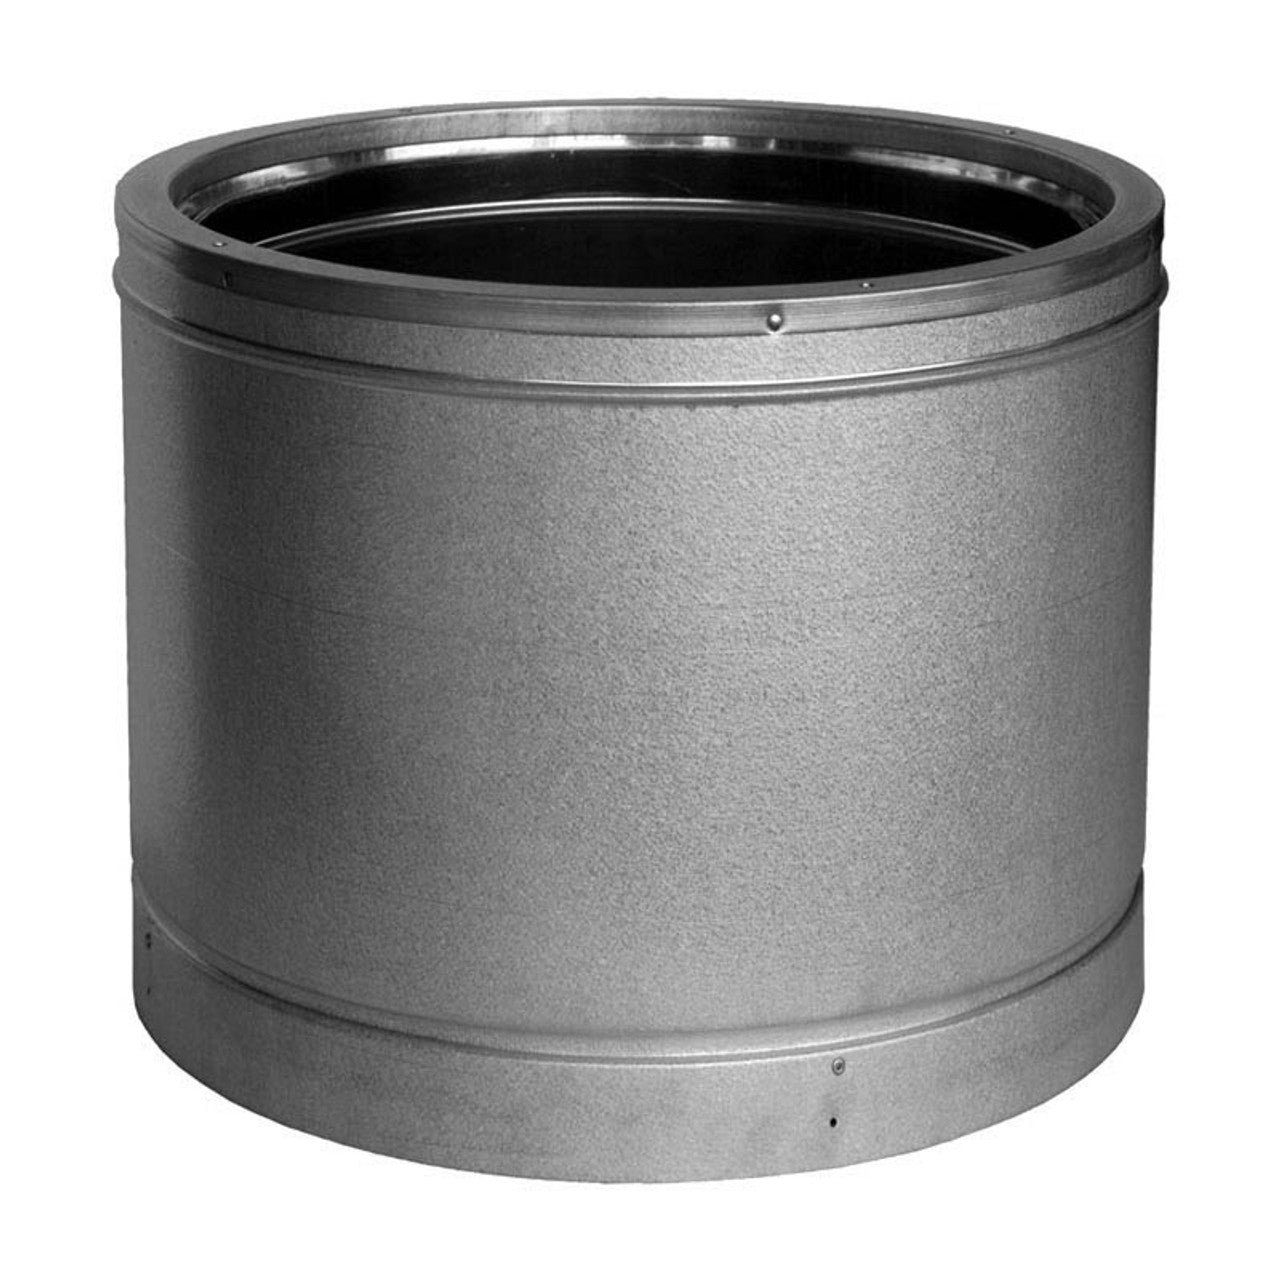 14" x 24" DuraVent DuraTech Double-Wall Stainless Steel Chimney Pipe - 14DT-24SS - Chimney Cricket